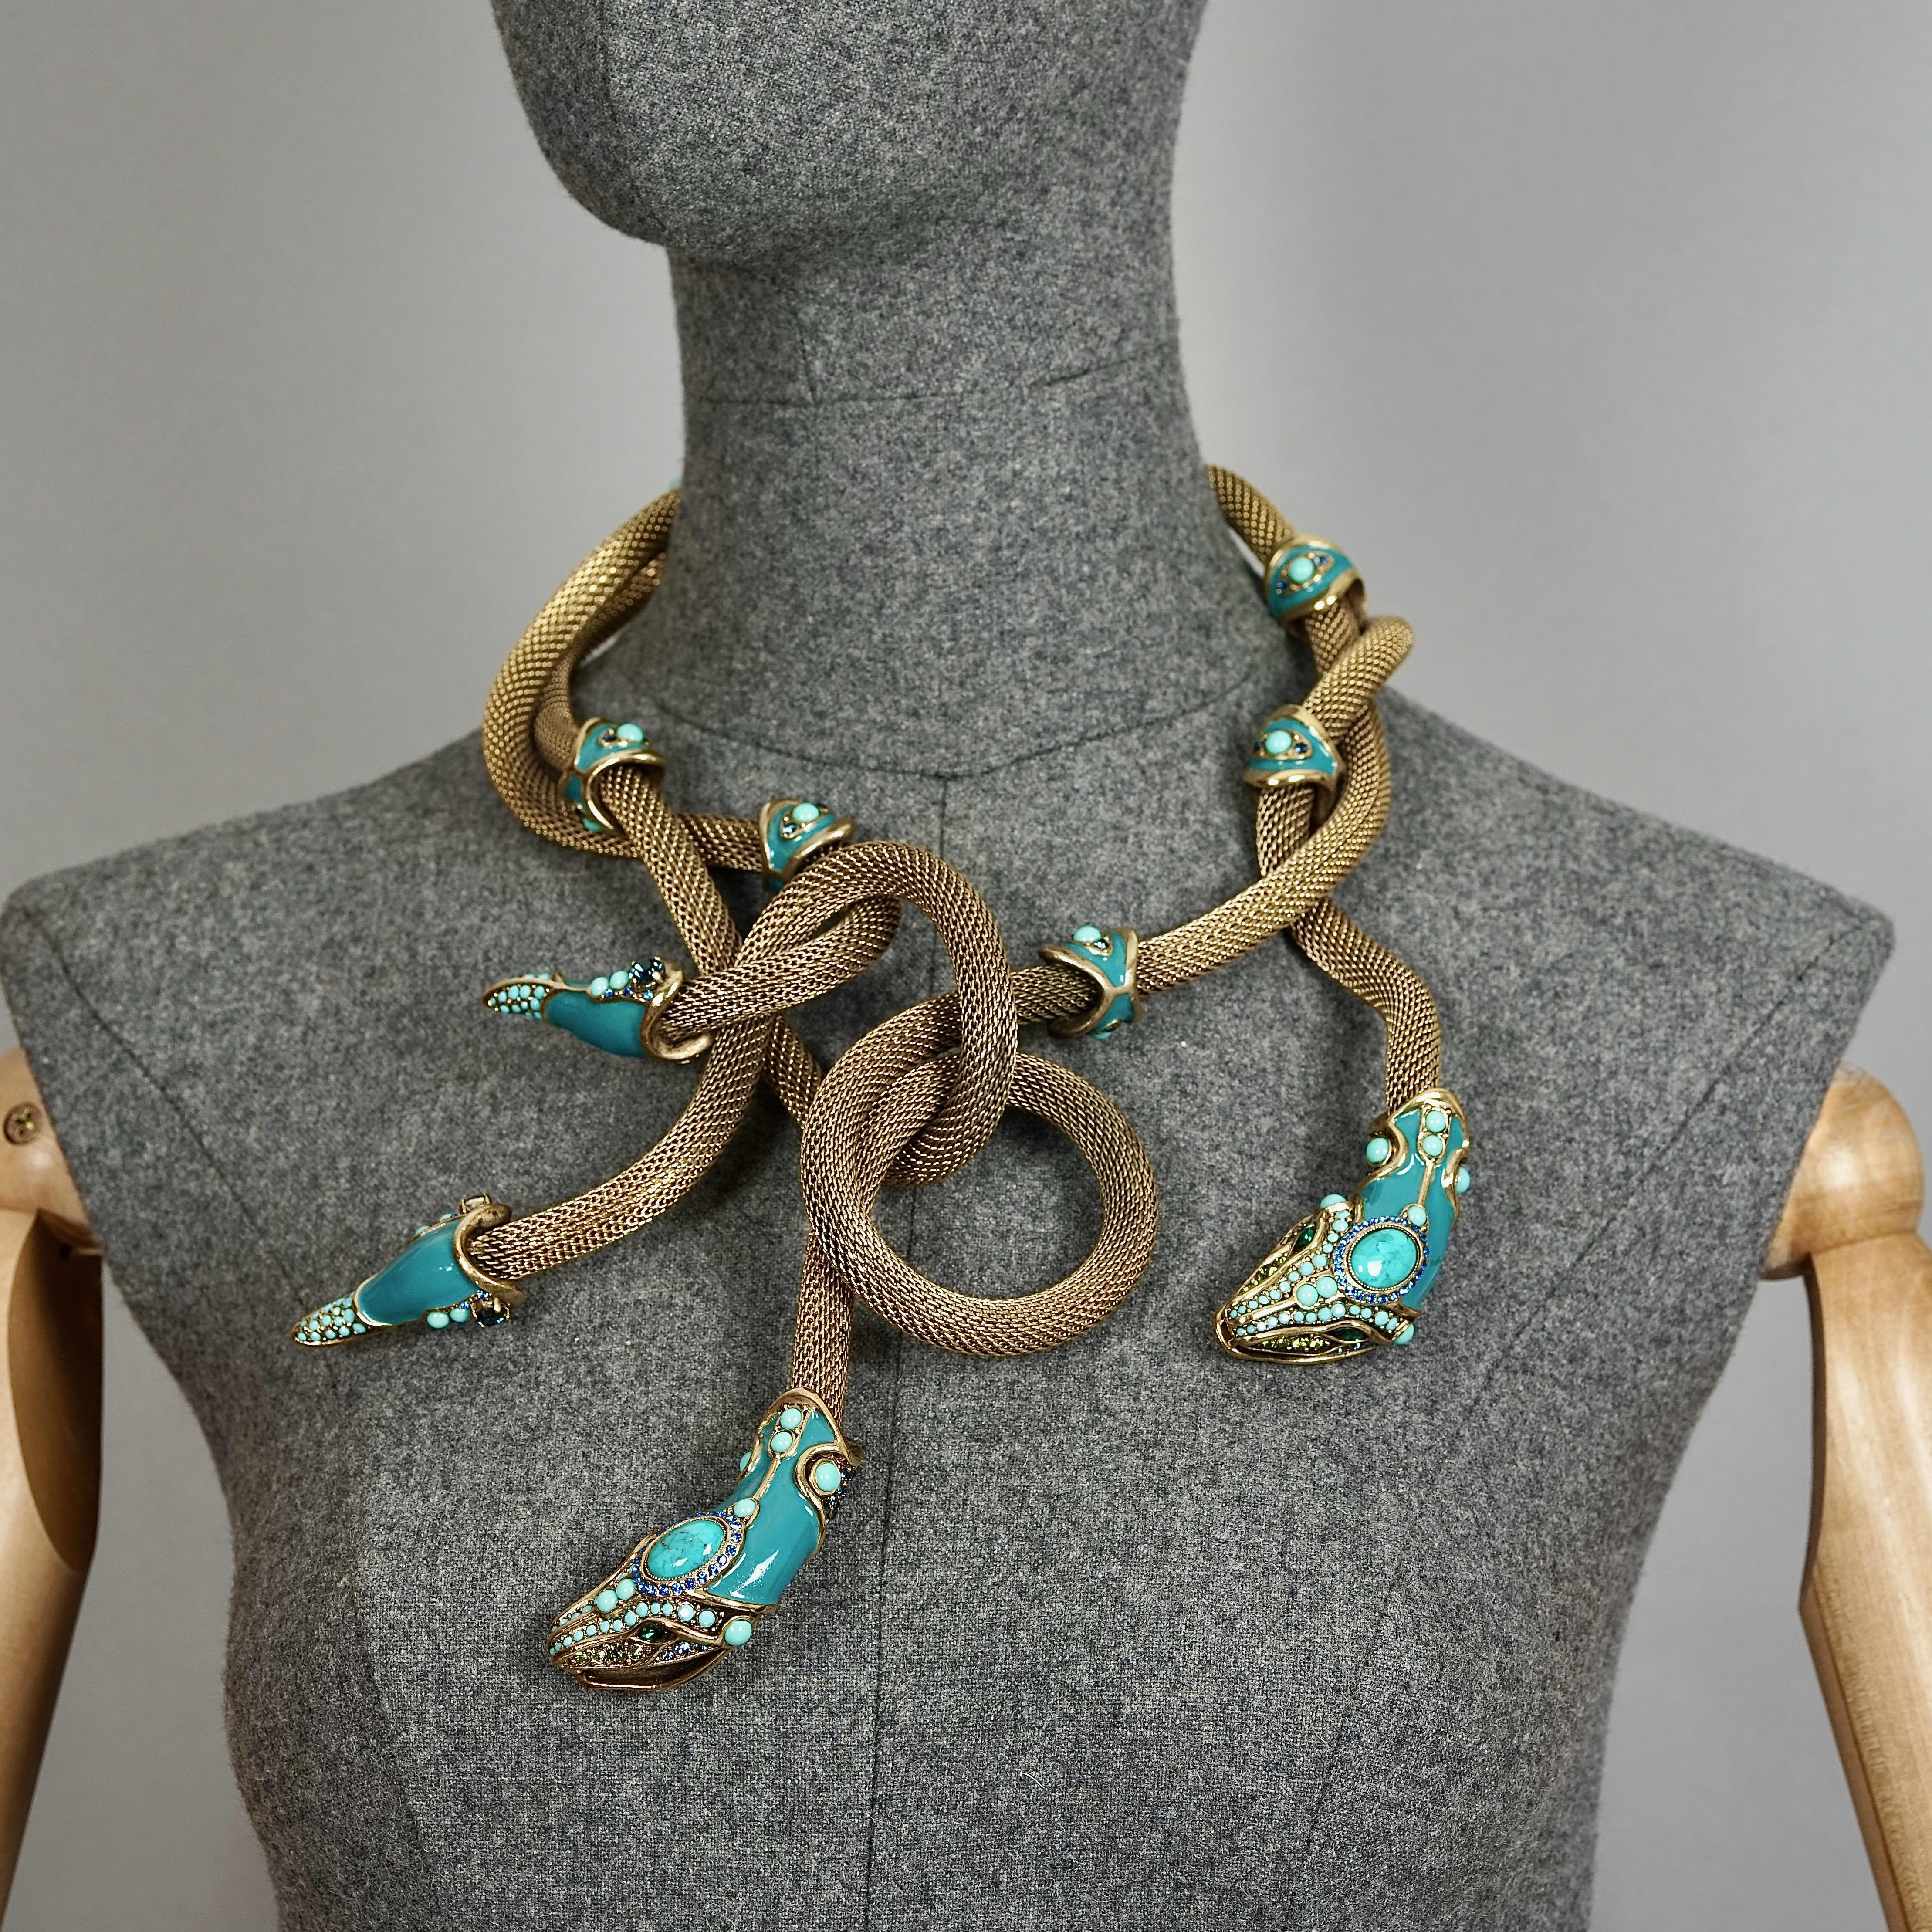 Massive LANVIN Spring 2010 Enamel Snake Coiled Medusa Necklace

Measurement:
Height: 5.51 inches (14 cm)
Wearable Length: 15.35 inches (39 cm) to 16.53 inches (42 cm)

Features:
- 100% Authentic LANVIN Paris.
- Massive necklace with coiled snake